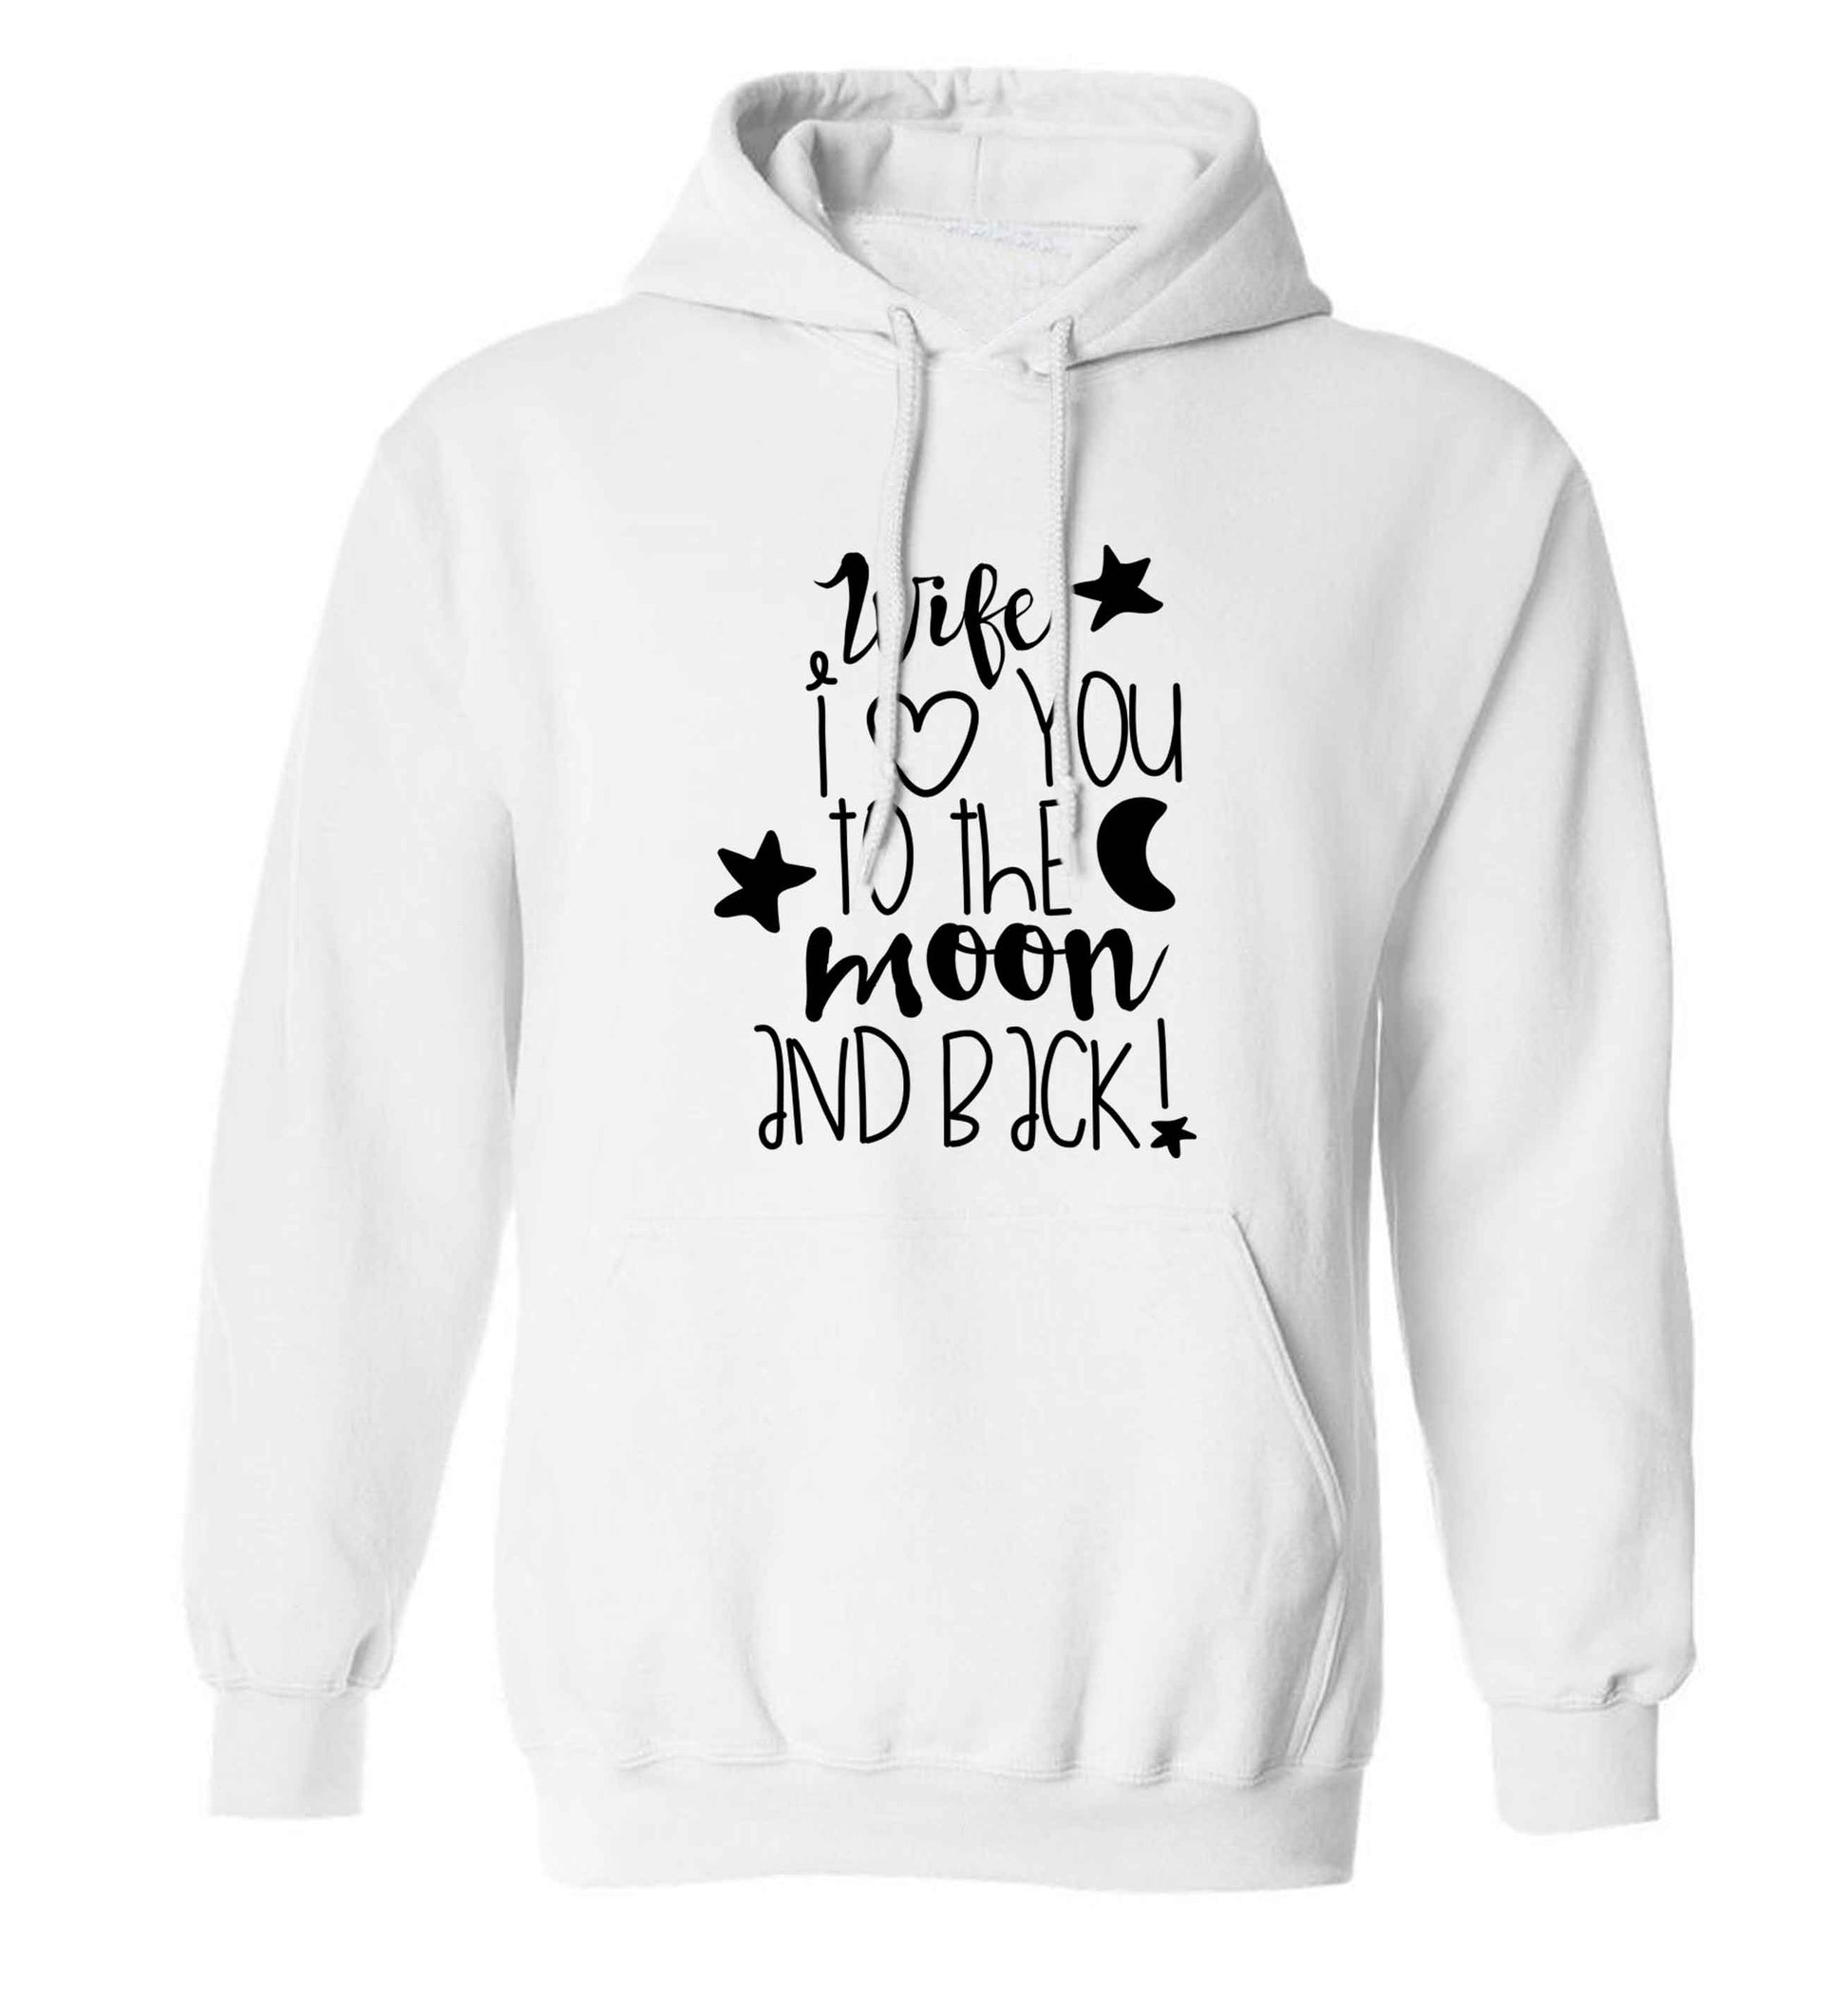 Wife I love you to the moon and back adults unisex white hoodie 2XL